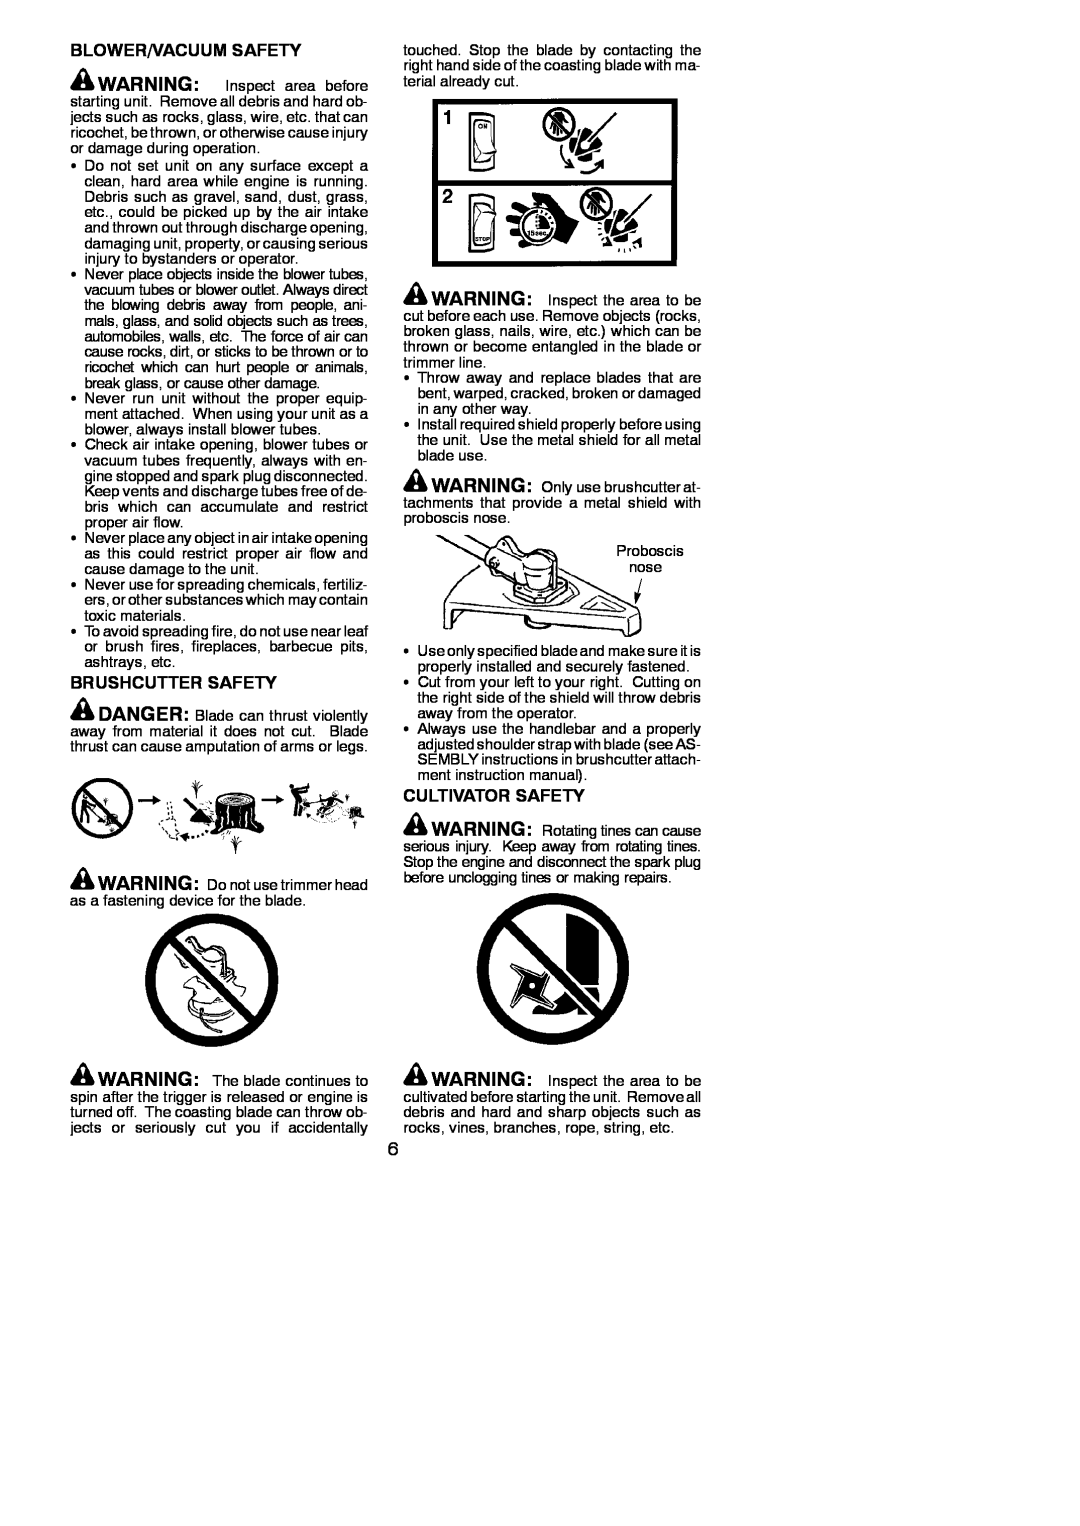 Poulan 545177327 instruction manual Blower/Vacuum Safety, Brushcutter Safety, Cultivator Safety 